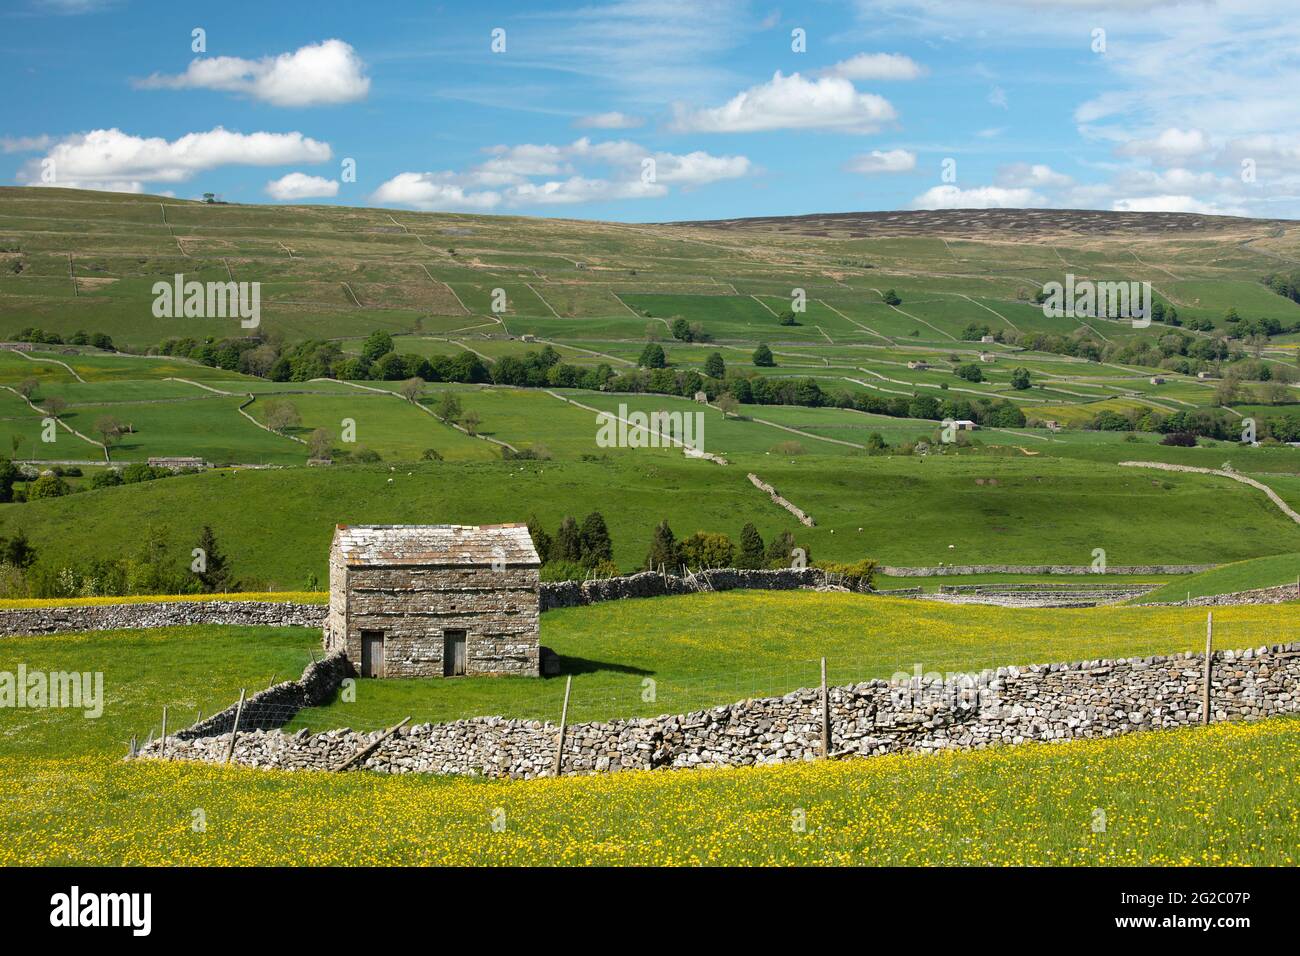 Traditional field barns and dry stone walls with a view across Wensleydale from Bainbridge, Wensleydale, Yorkshire Dales, UK Stock Photo